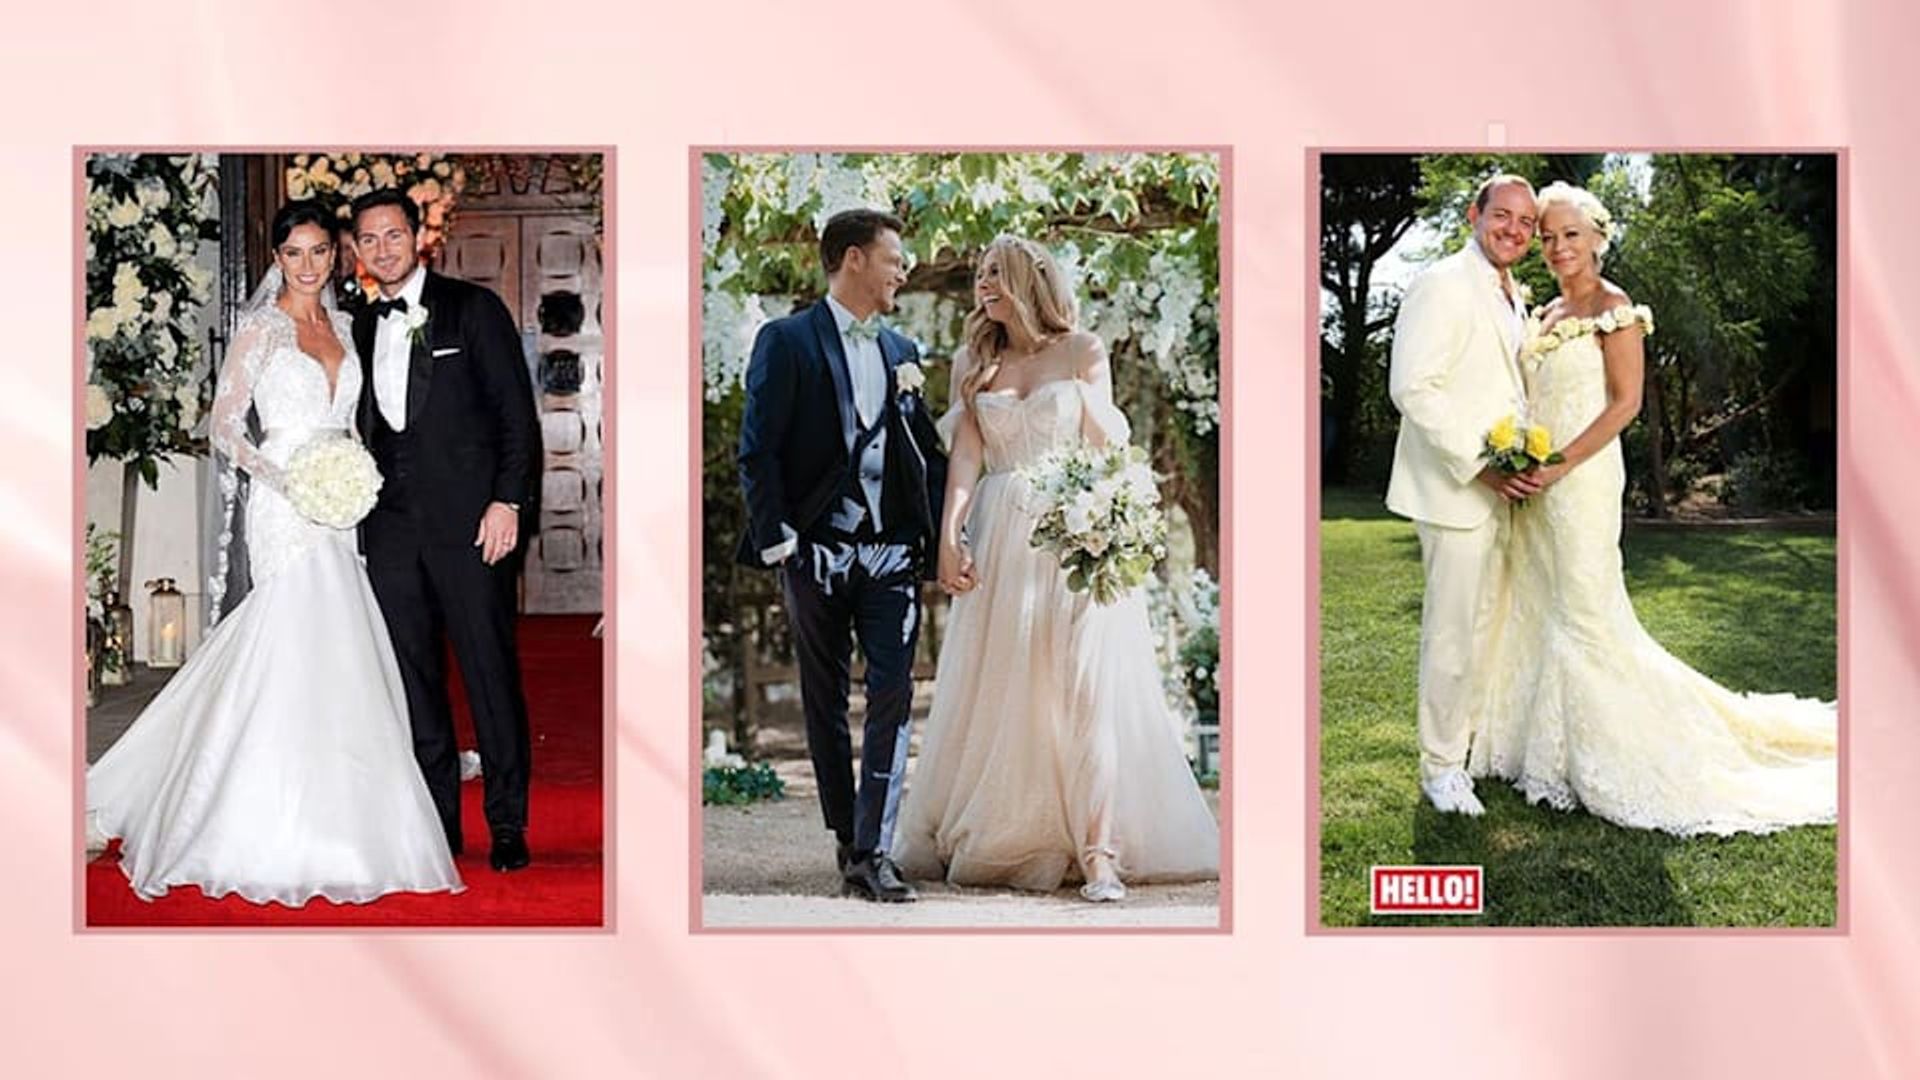 Loose Women's bold brides: 9 unexpected wedding dresses worn by Stacey Solomon, Christine Lampard and more